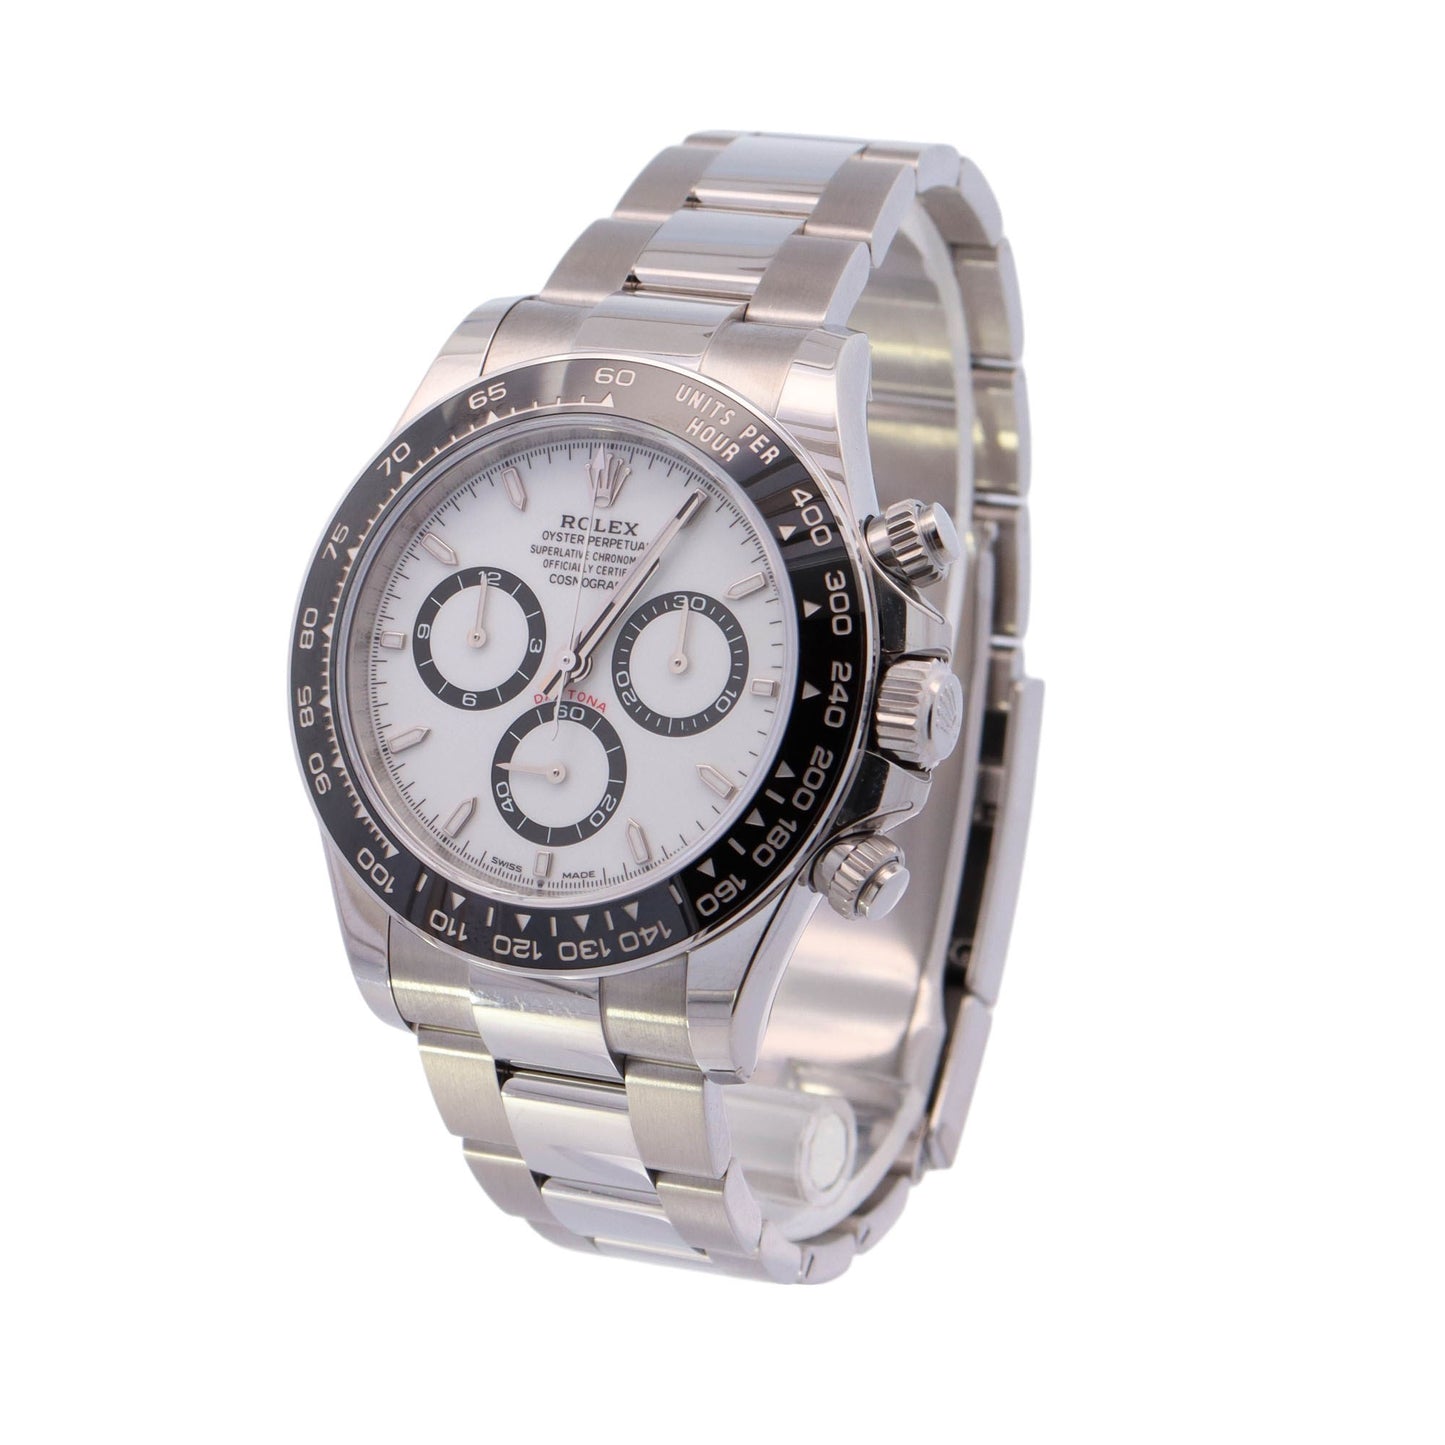 Rolex Daytona “Panda” Stainless Steel 40mm White Chronograph Dial Watch Reference# 126500LN